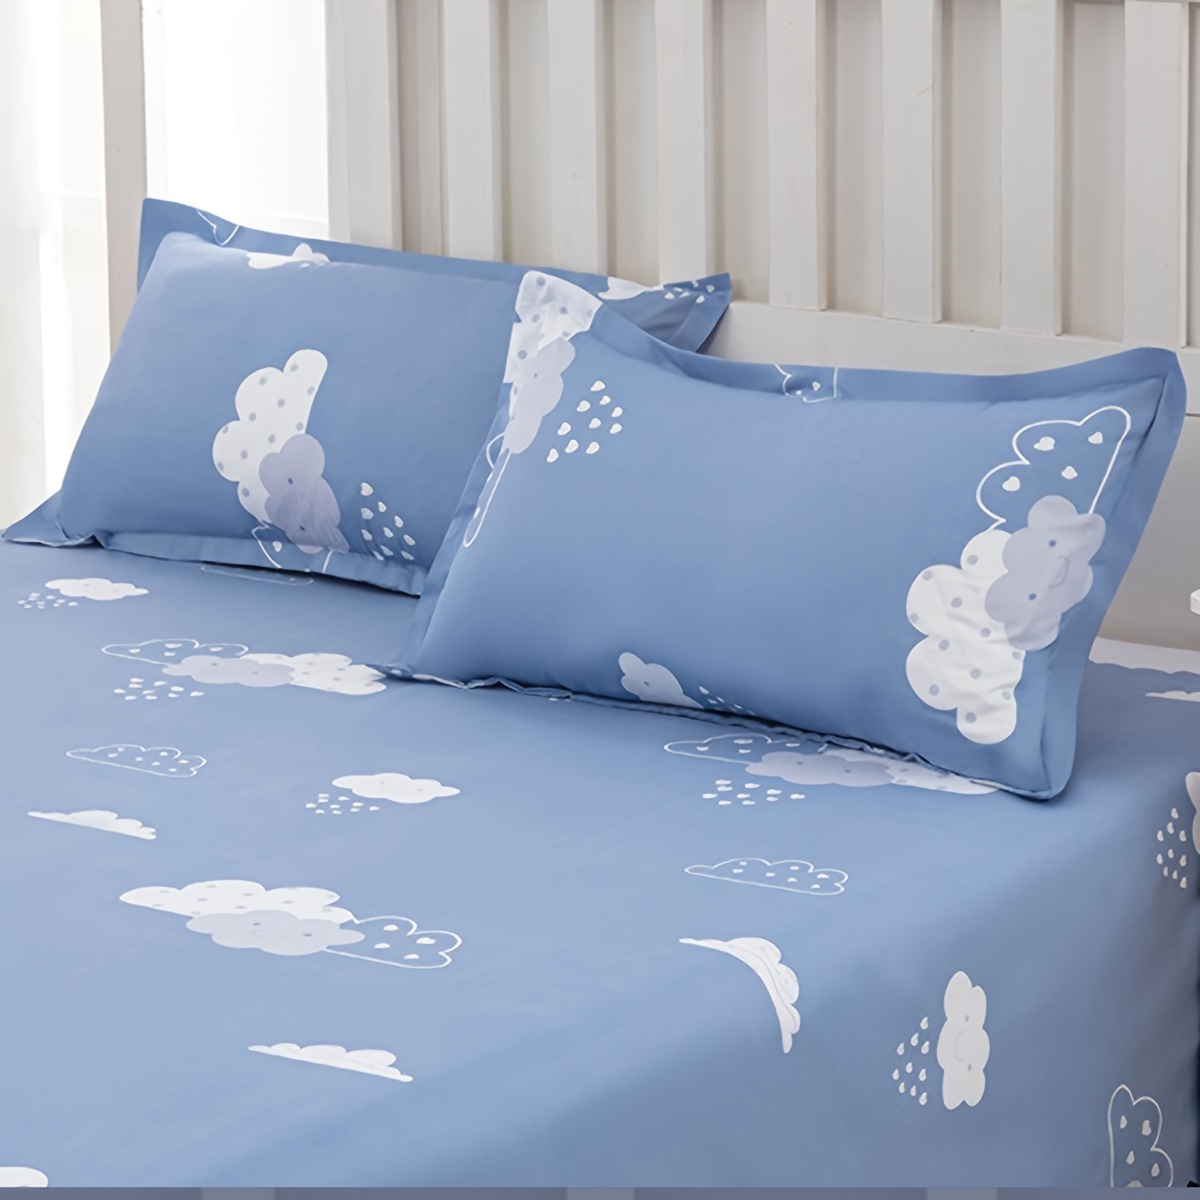 

1pc Contemporary Style Pillowcase, Ultra-soft Skin-friendly Polyester, 48cm X 74cm, Cloud Print Design, Bedding For Dorm & Home